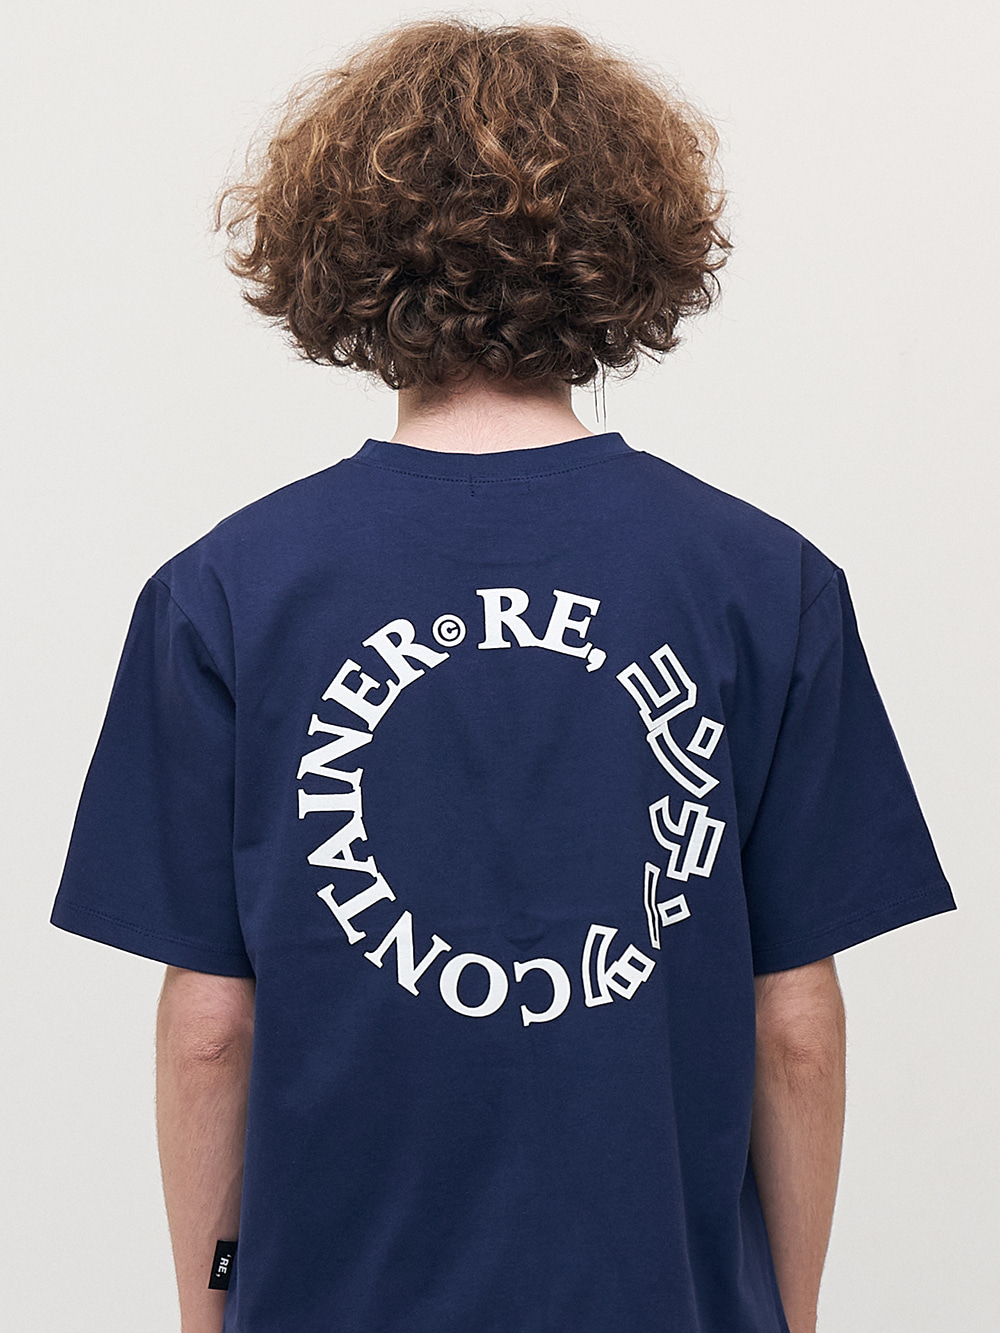 contents round logo t-shirts (navy)